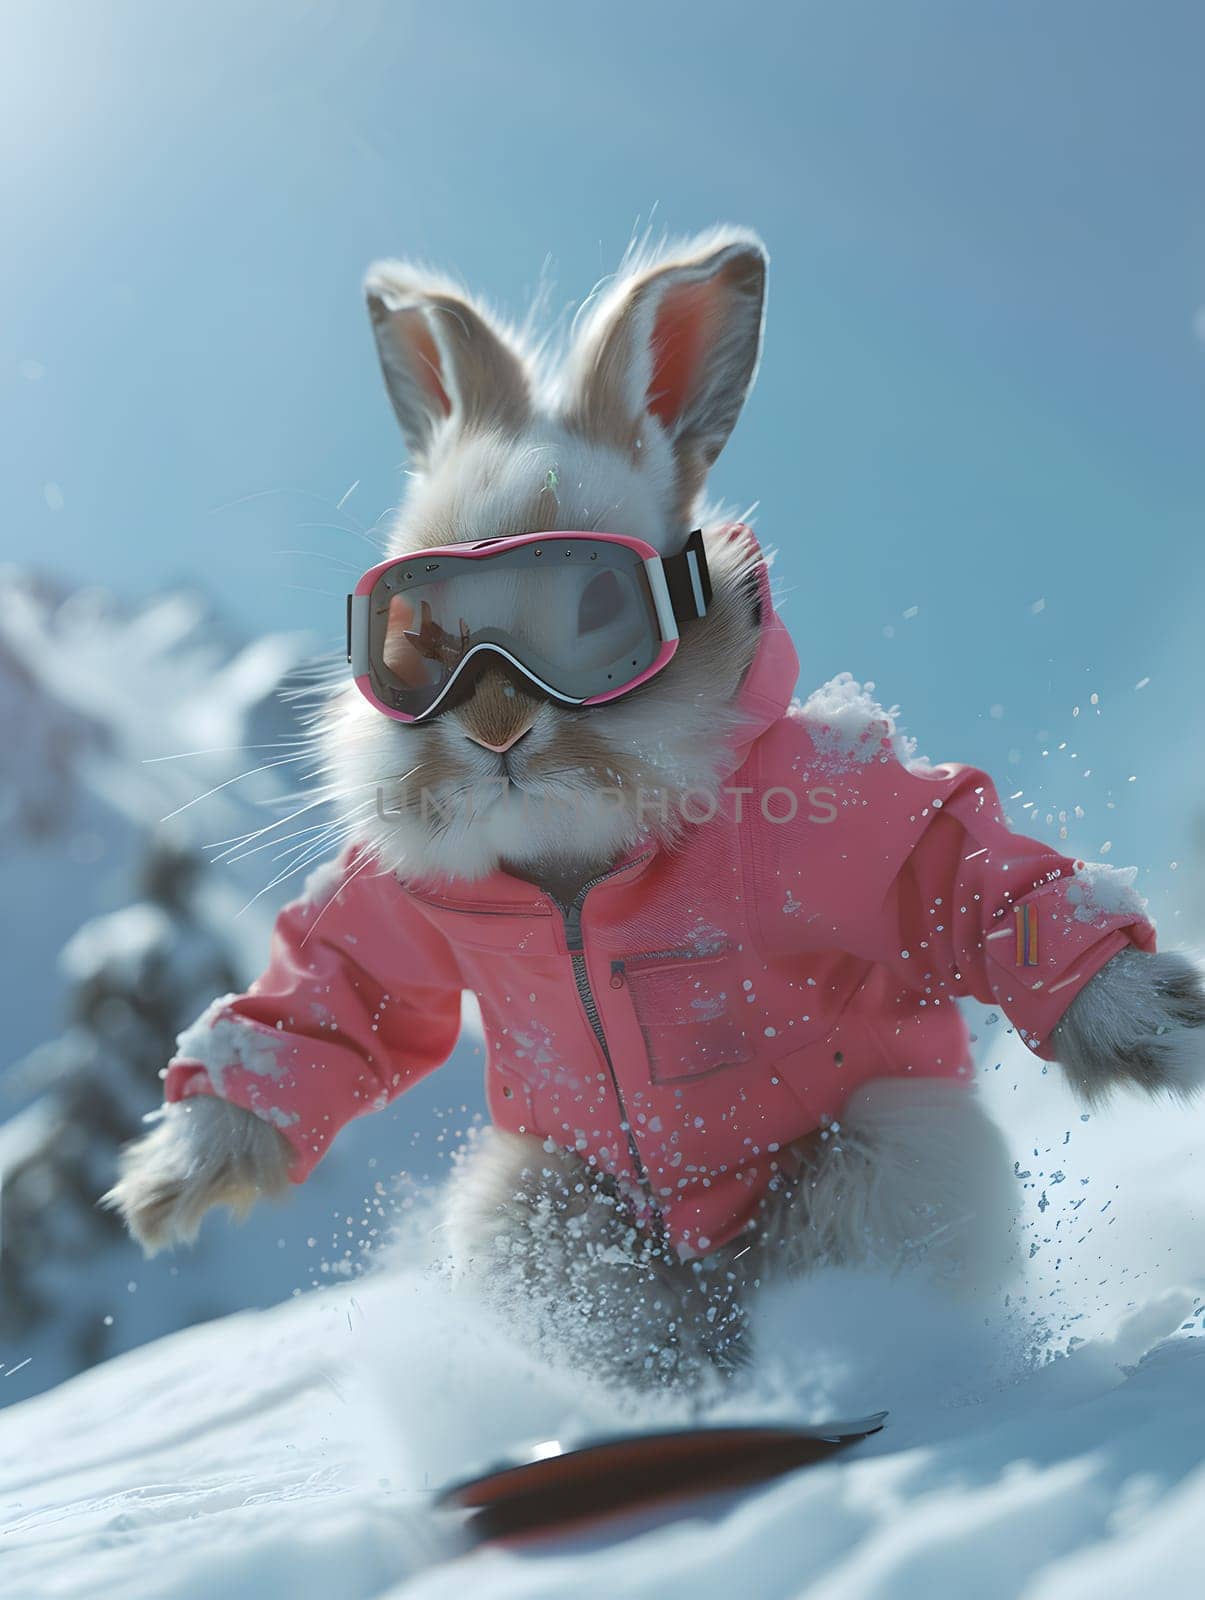 A rabbit wearing goggles, a helmet, and a pink jacket is enjoying outdoor recreation by snowboarding in the freezing snow under the clear sky